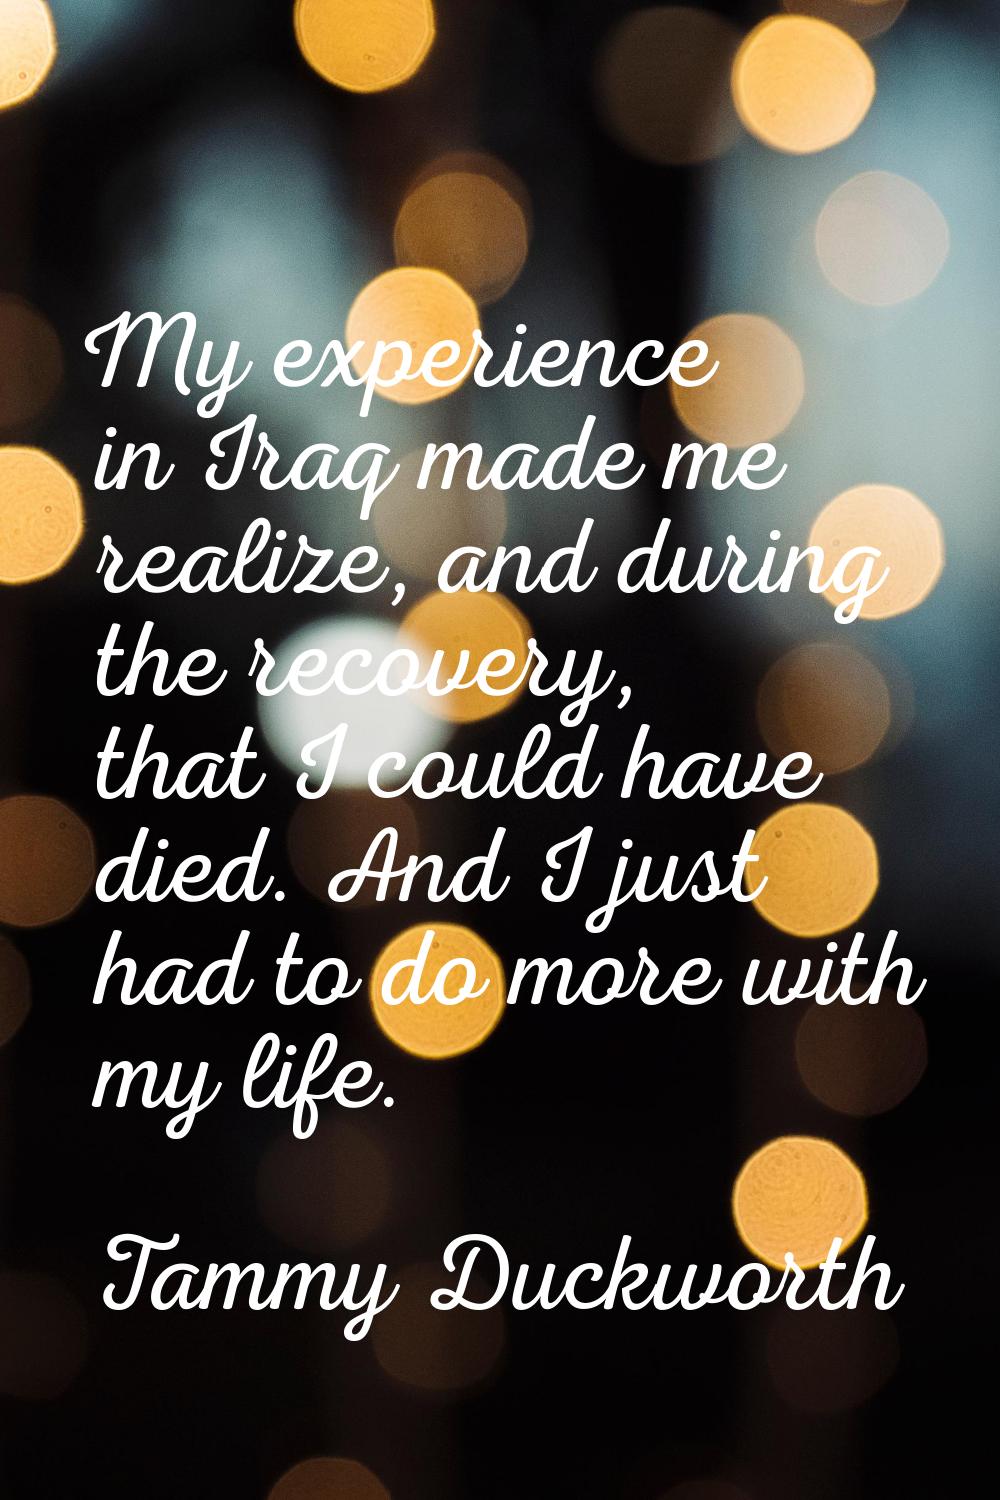 My experience in Iraq made me realize, and during the recovery, that I could have died. And I just 